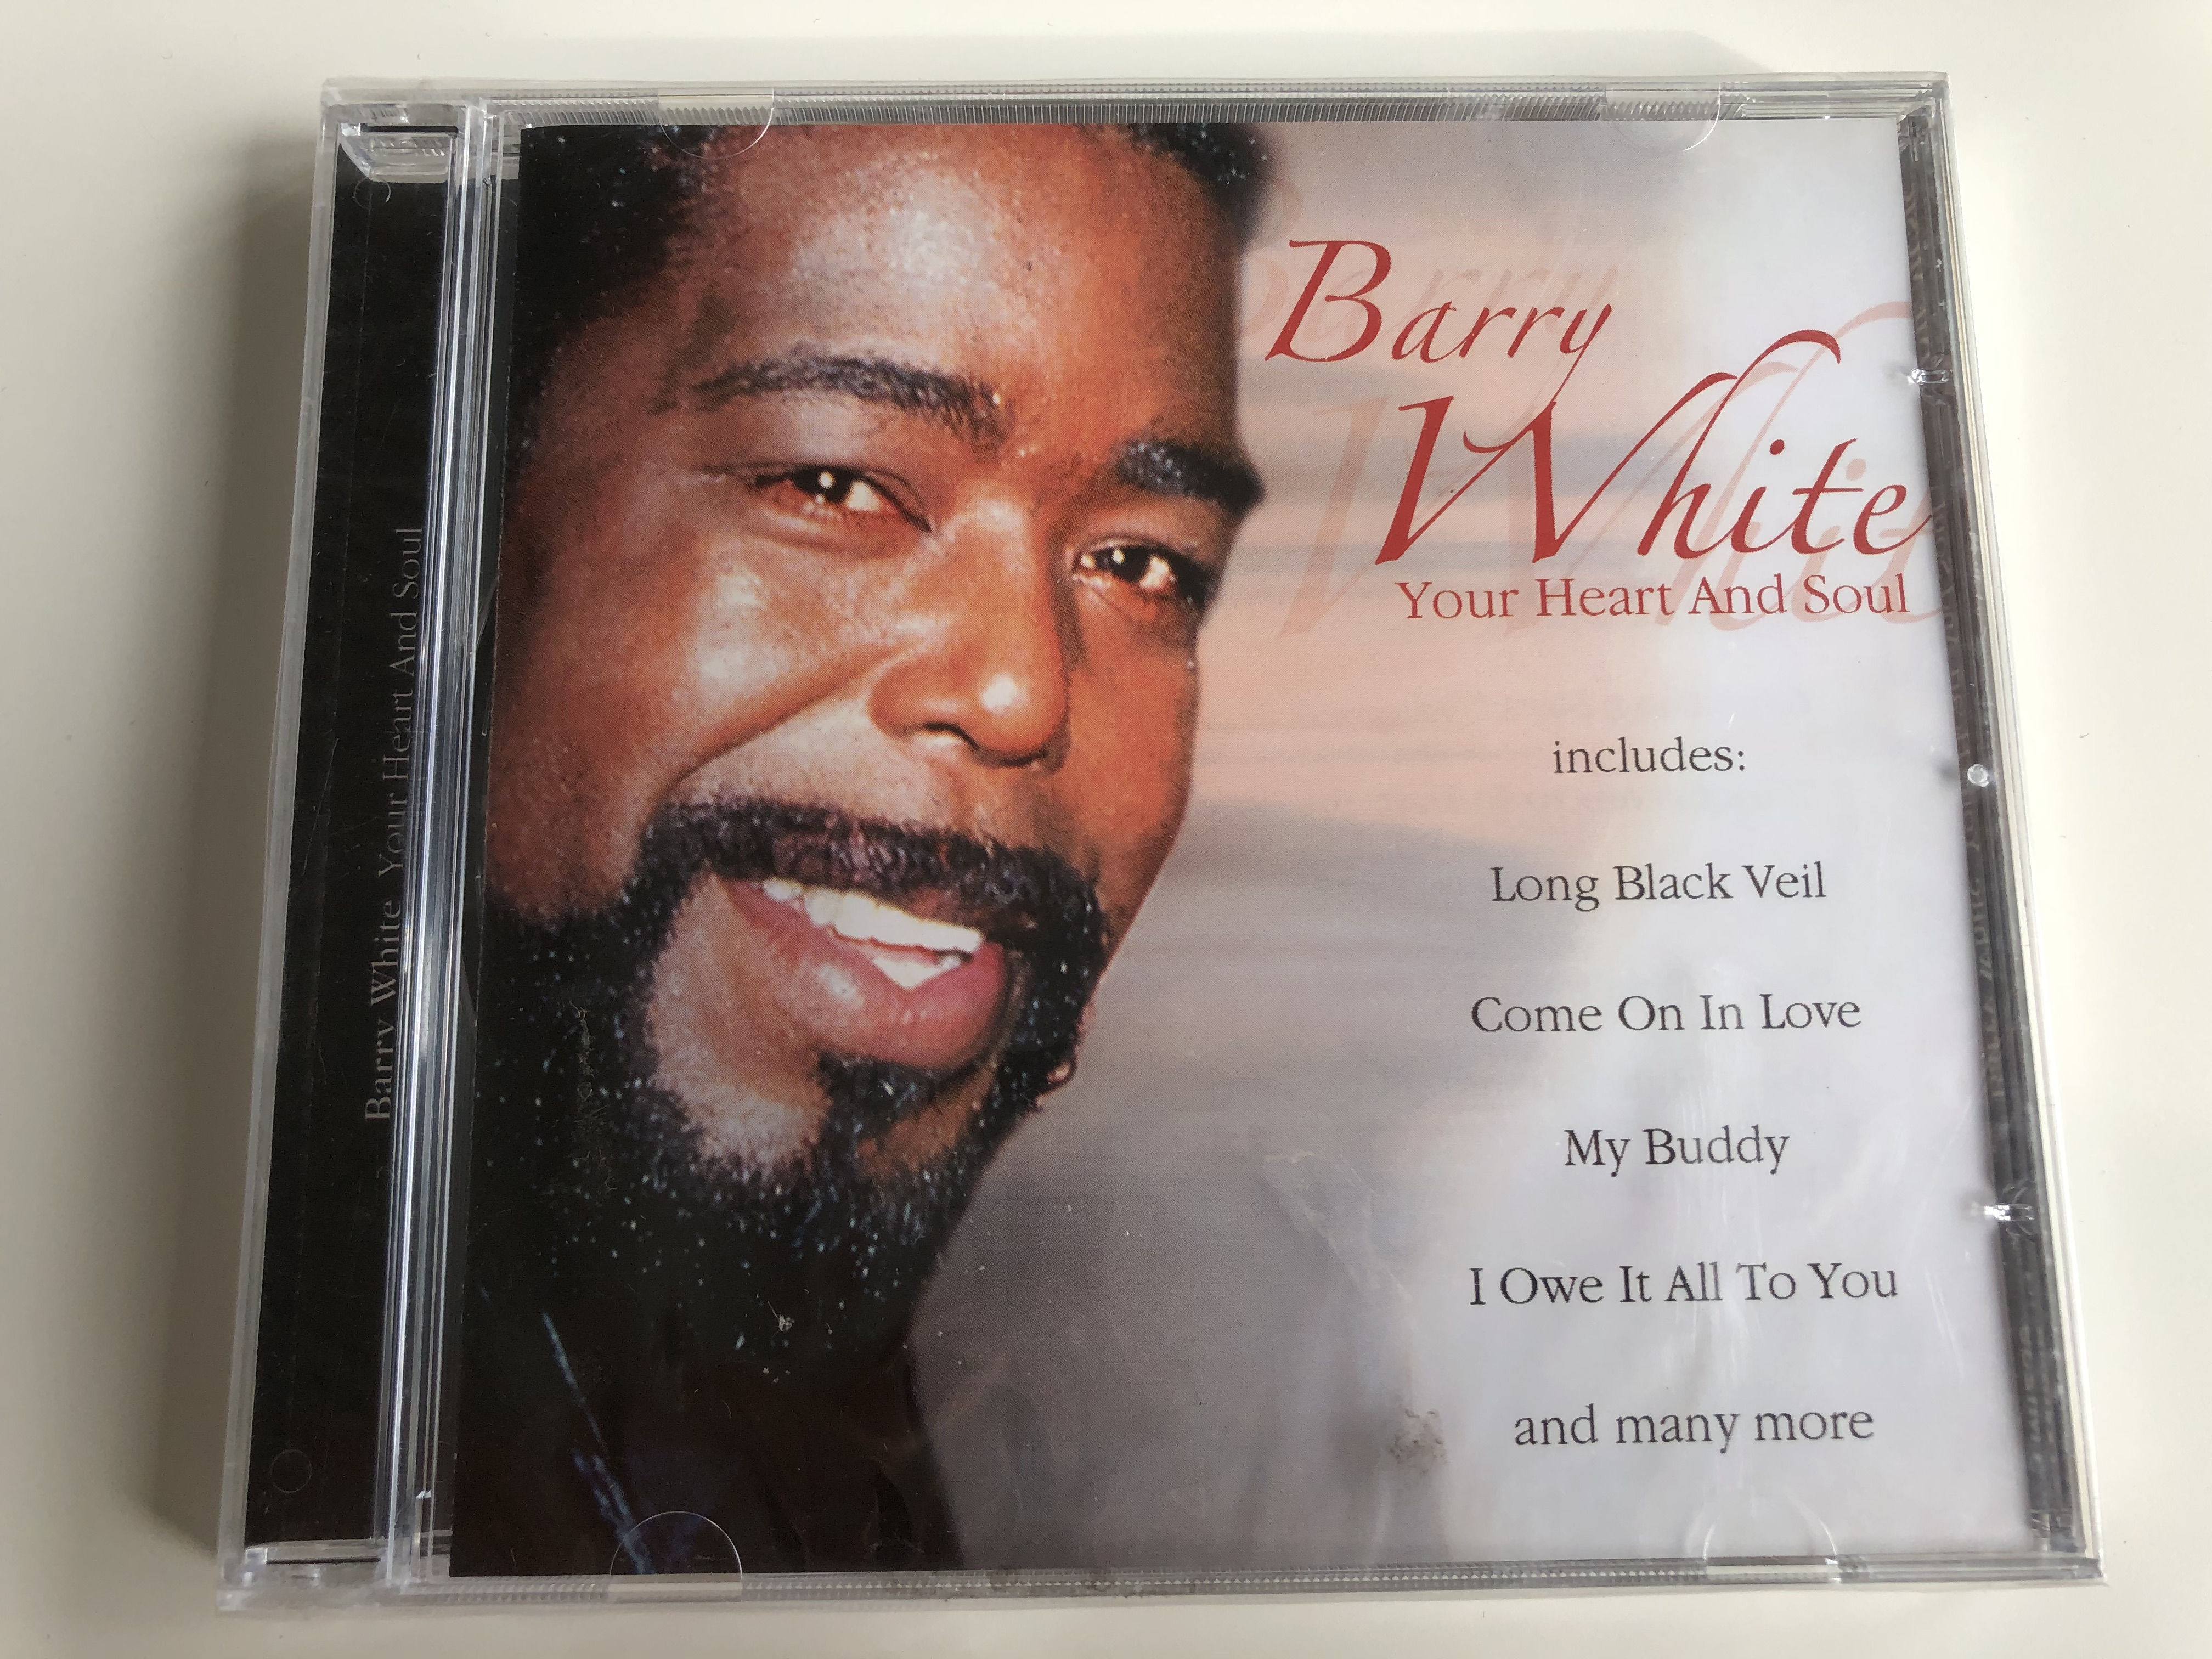 barry-white-your-heart-and-soulimg-1643.jpg